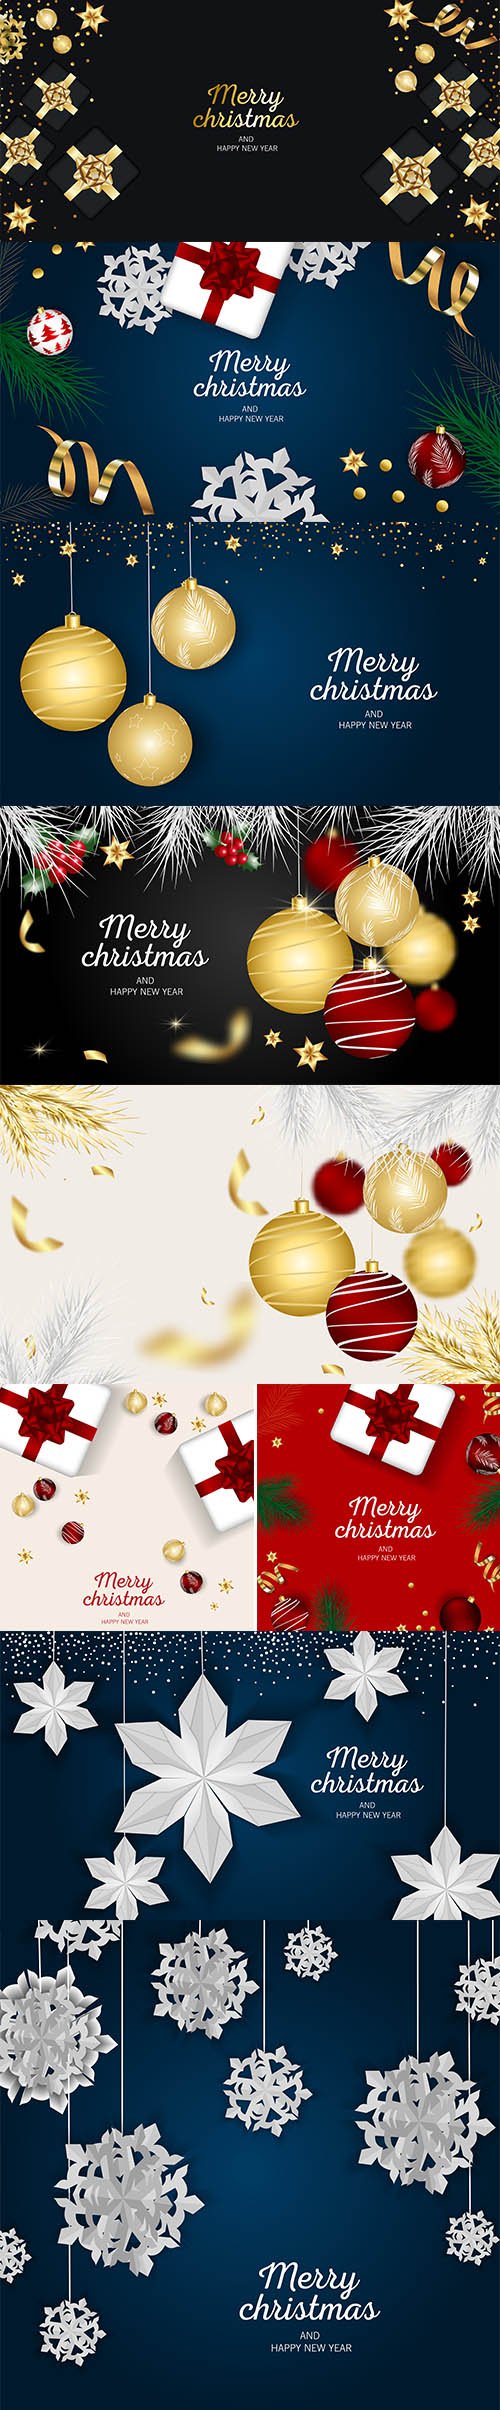 Merry christmas and happy new year greeting with festive christmas balls